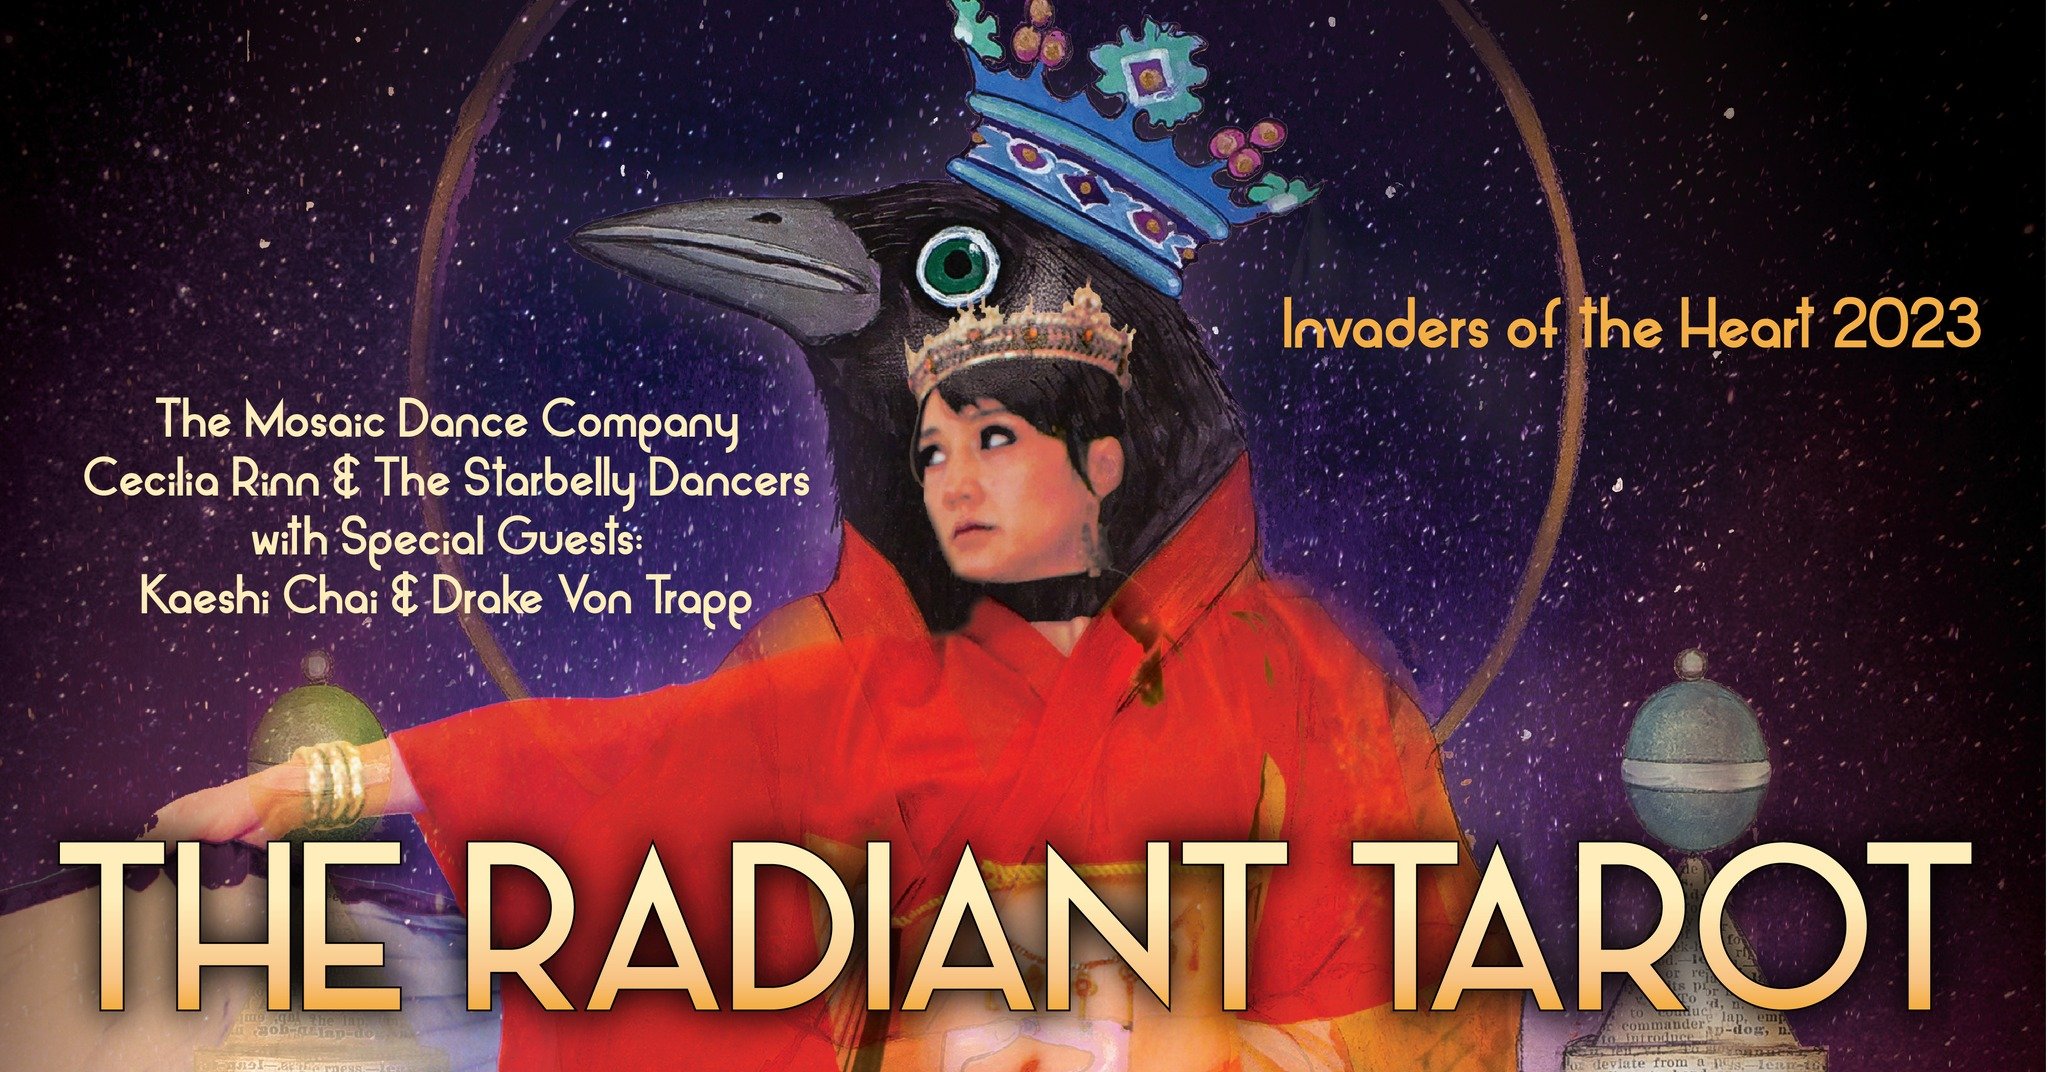 Invaders of the Heart: The Radiant Tarot Artisan Market